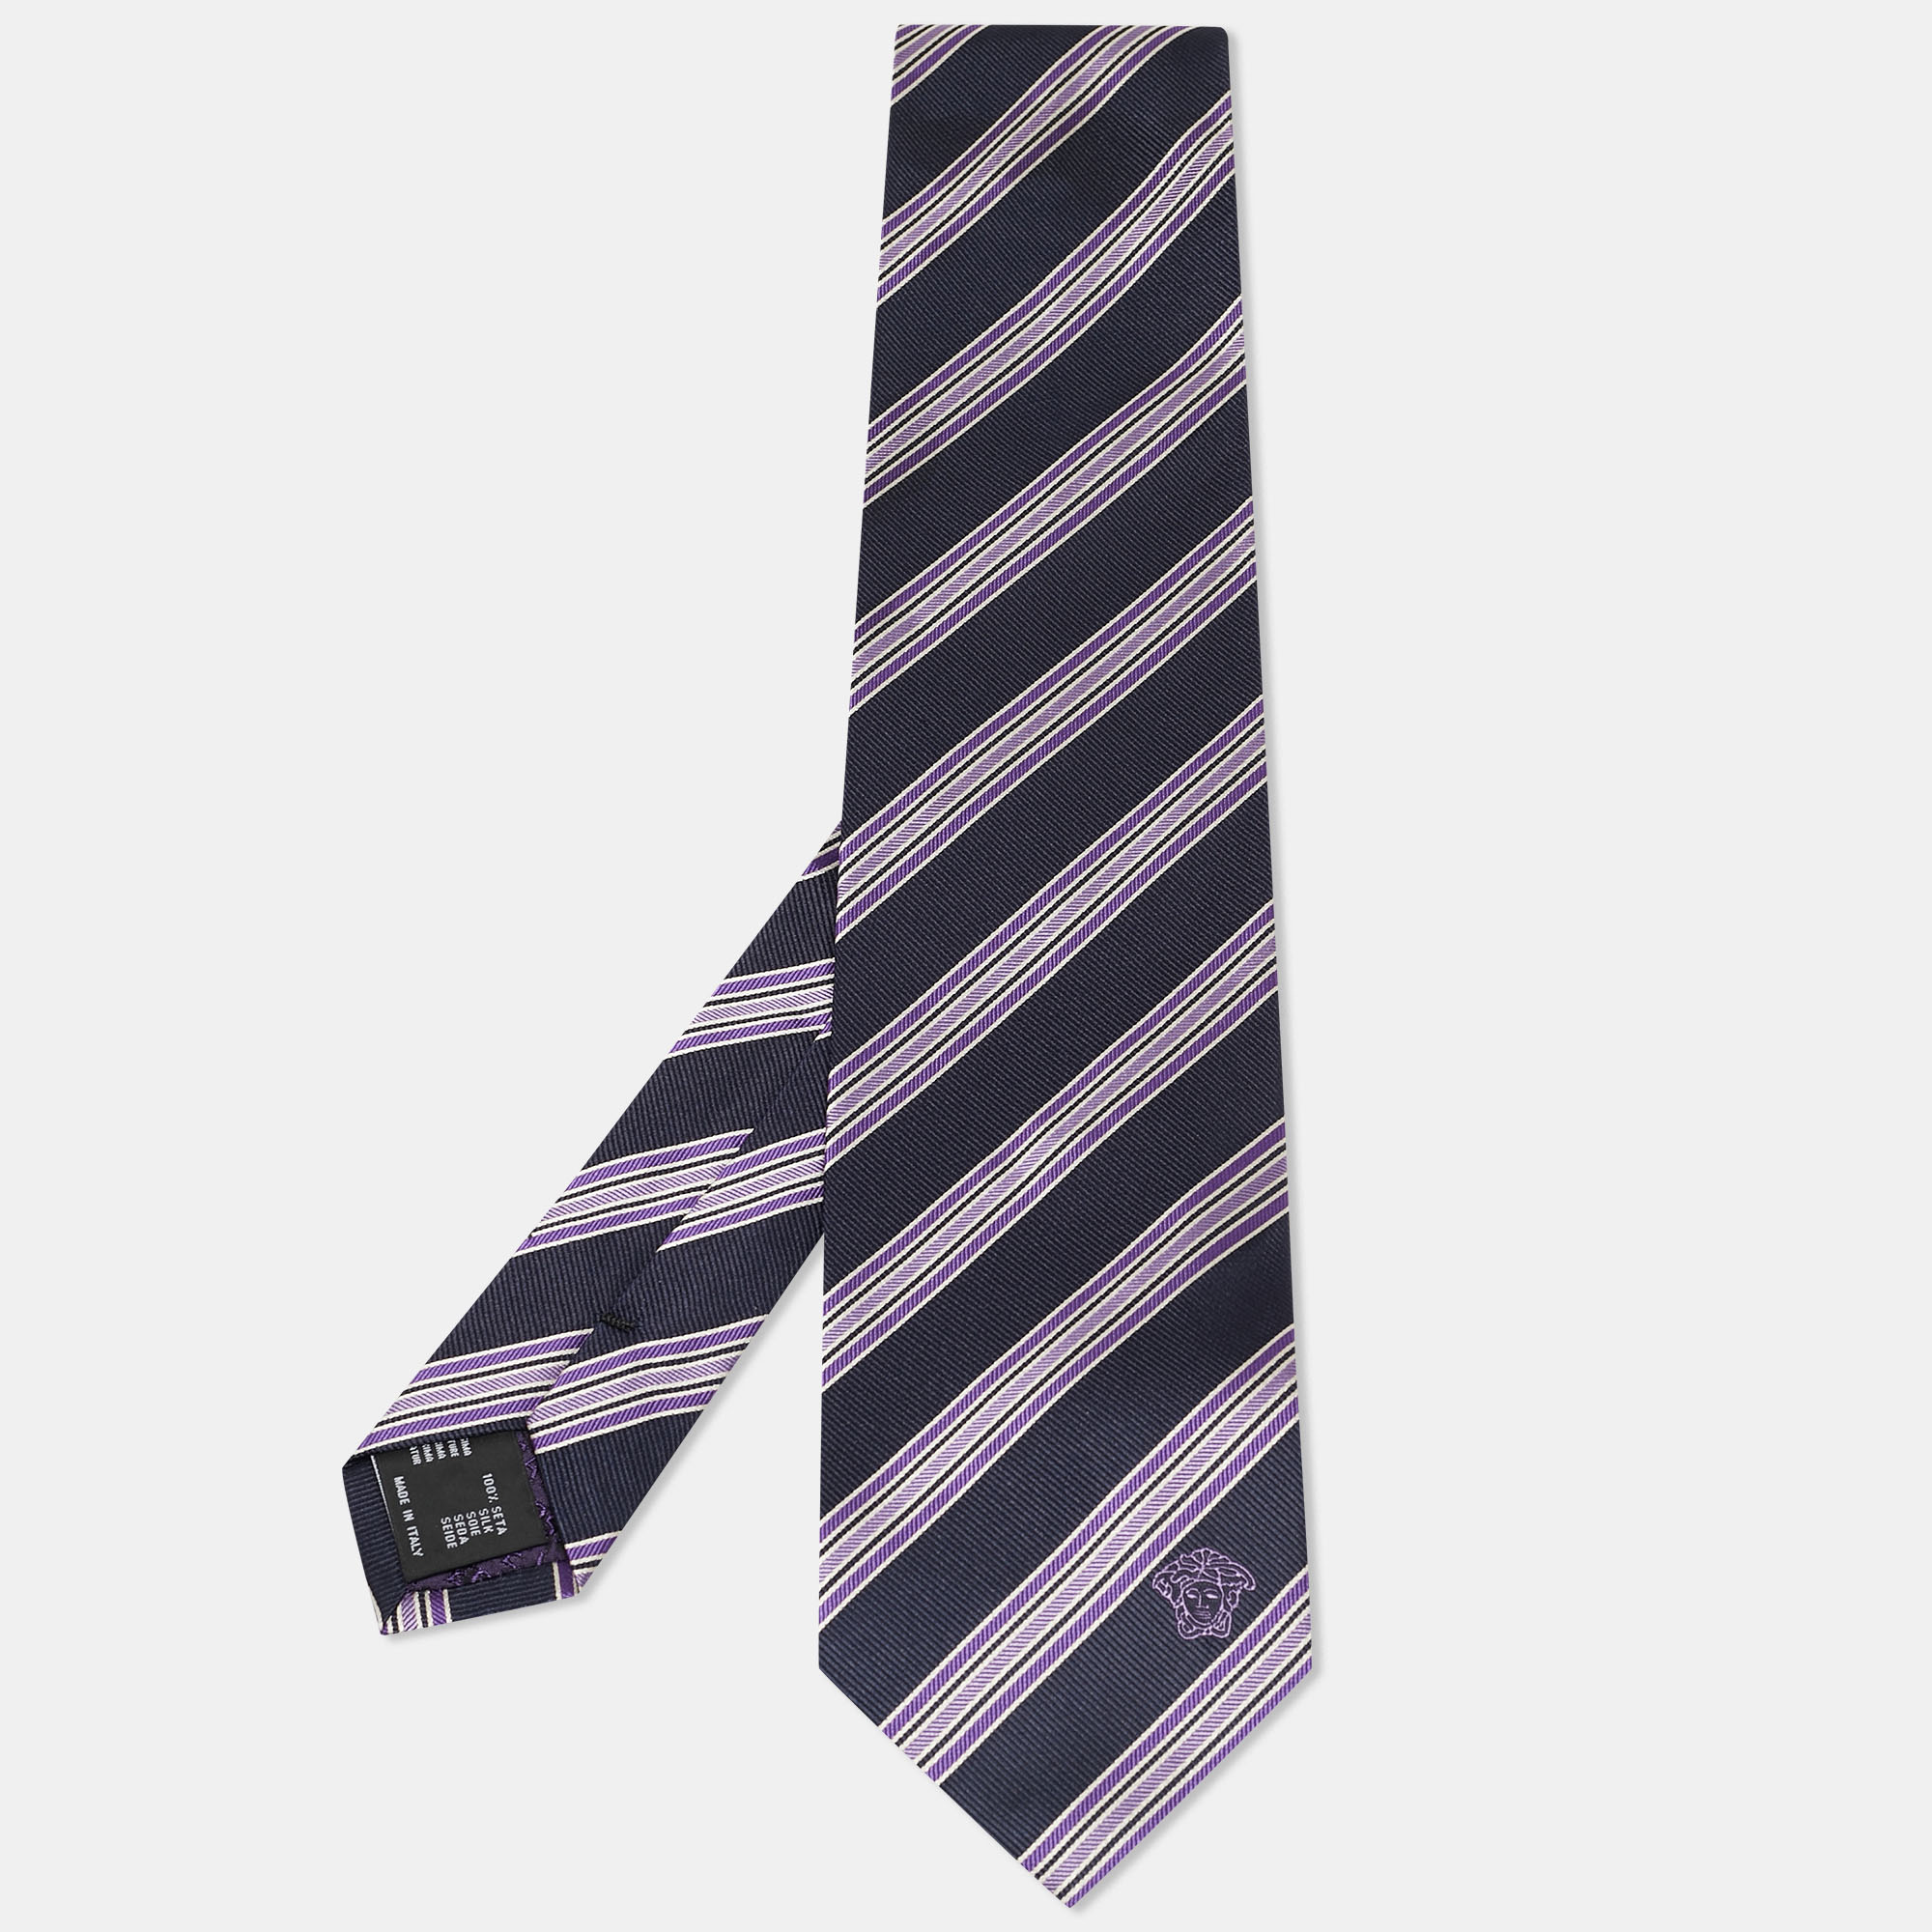 This designer tie is a perfect formal accessory that has a modern appeal. Made from luxurious materials it features intricate patterns and the brand label is neatly stitched at the back. It is sure to add style to your blazers.